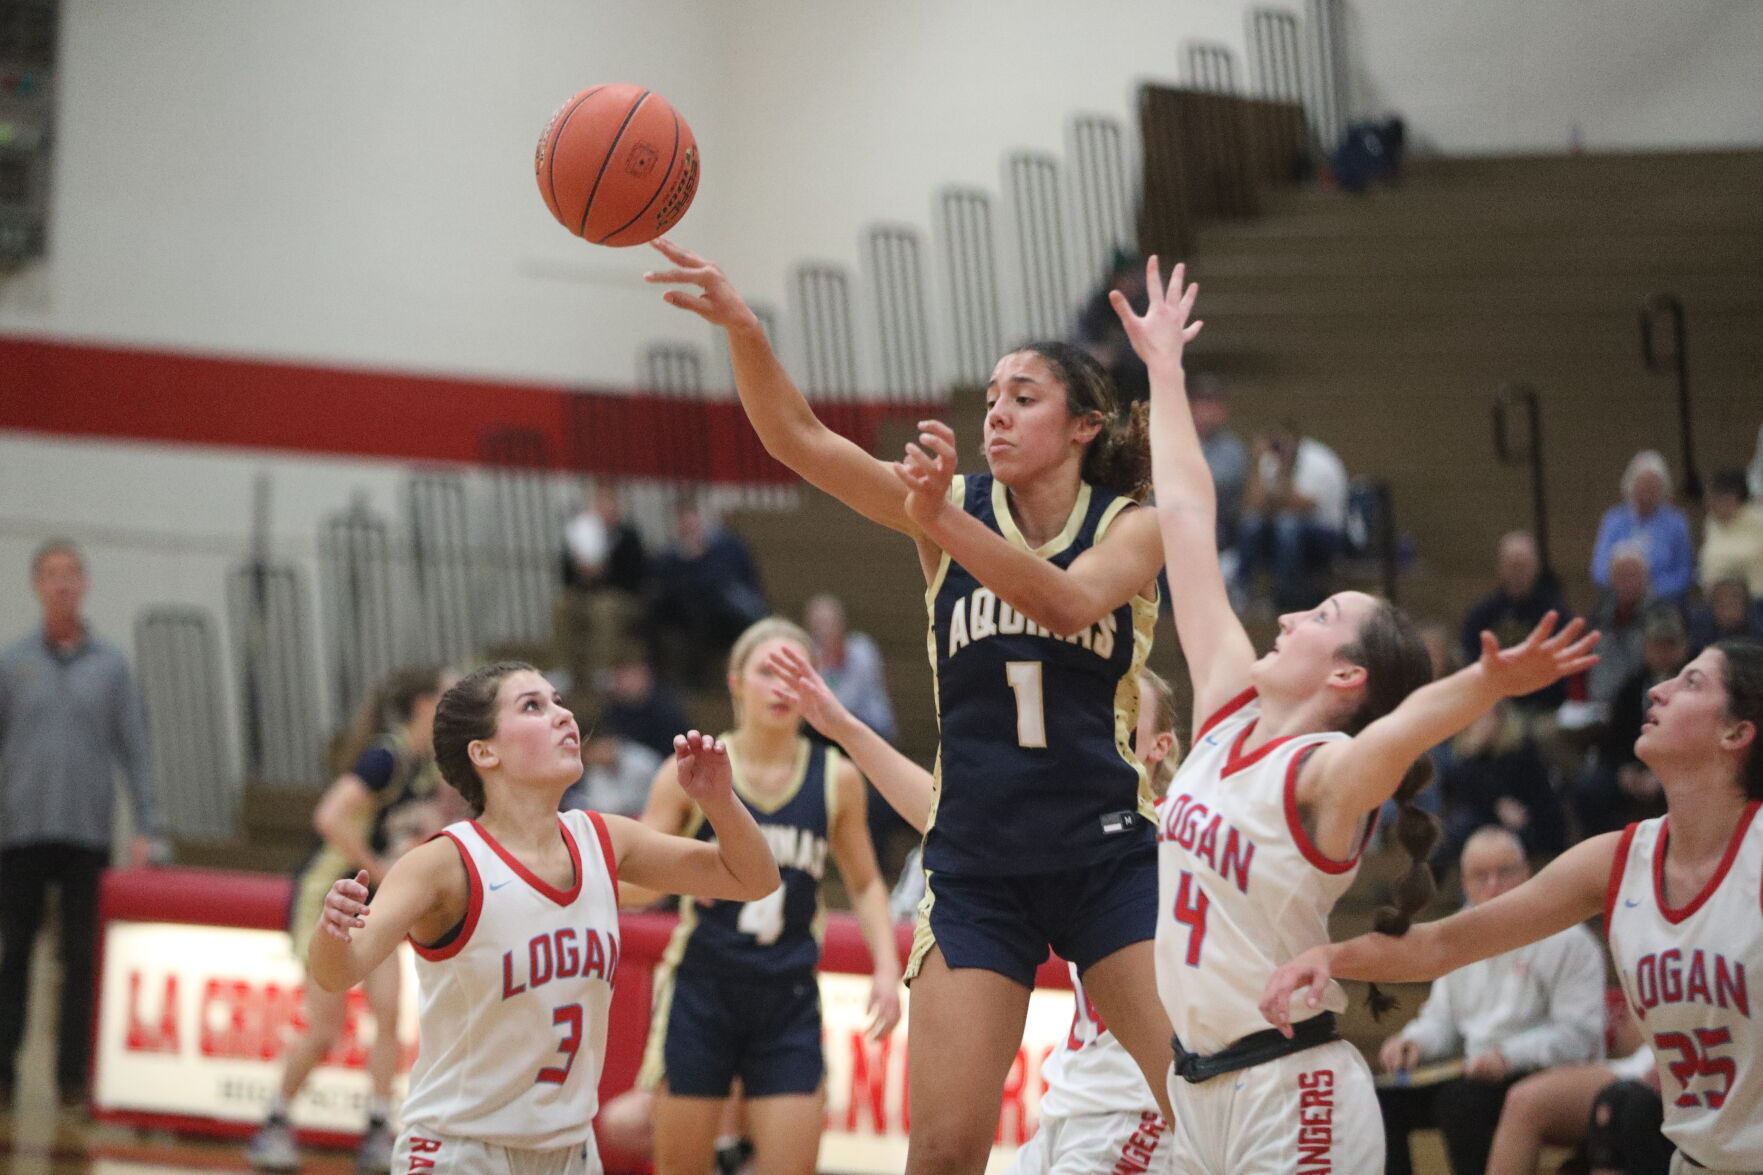 La Crosse Aquinas Girls Basketball Team Secures 91st Consecutive Conference Win with 61-45 Victory